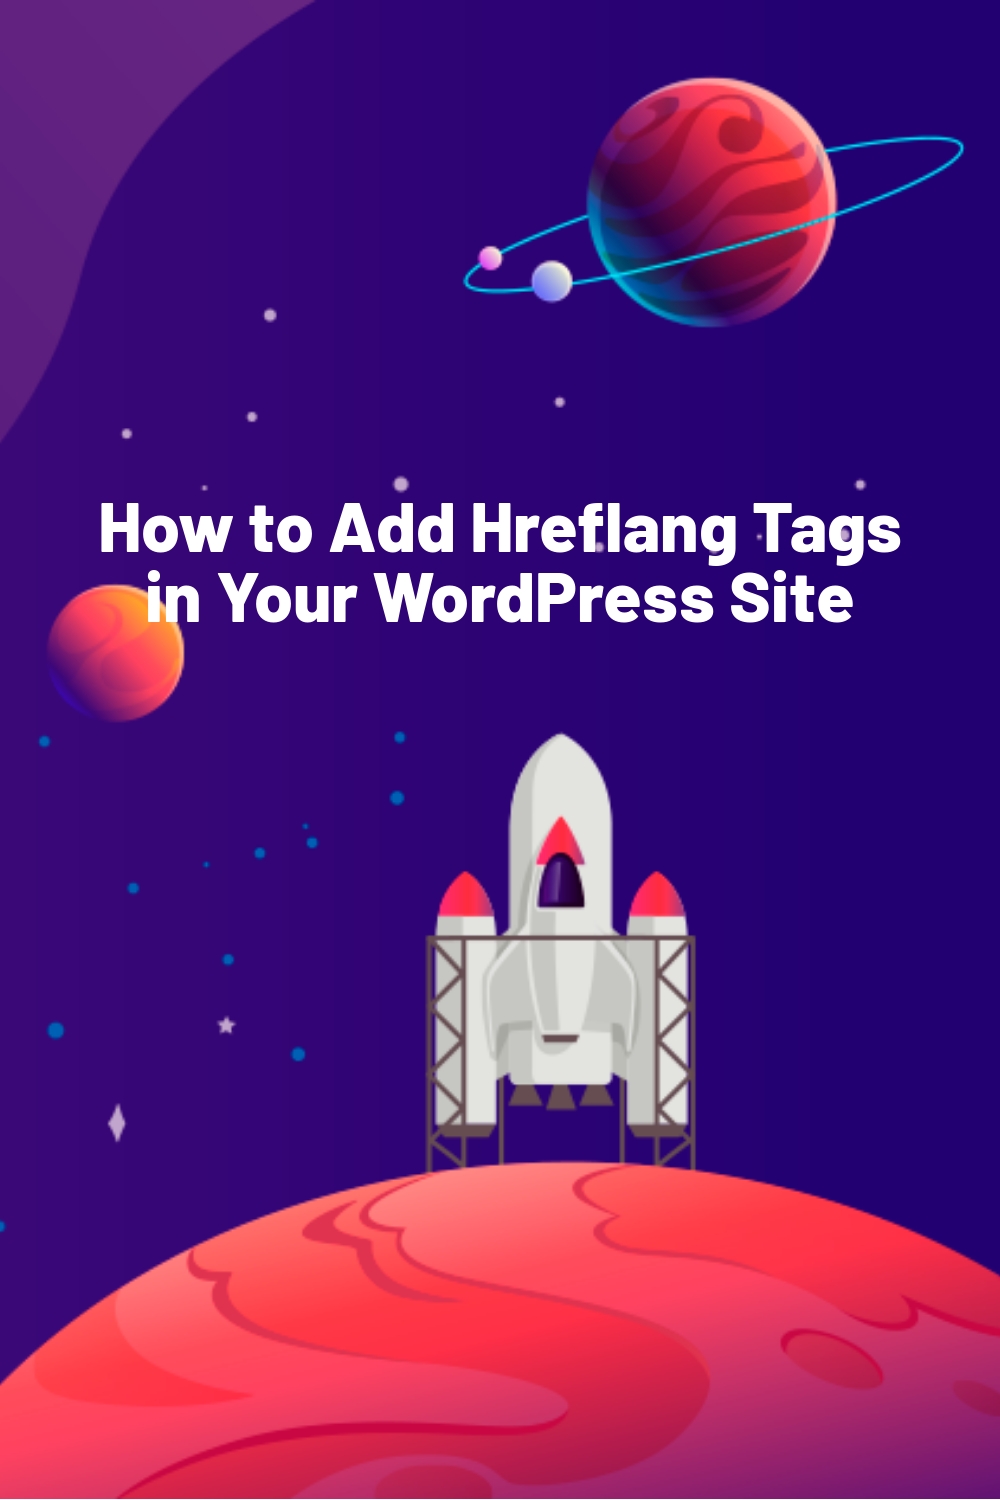 How to Add Hreflang Tags in Your WordPress Site